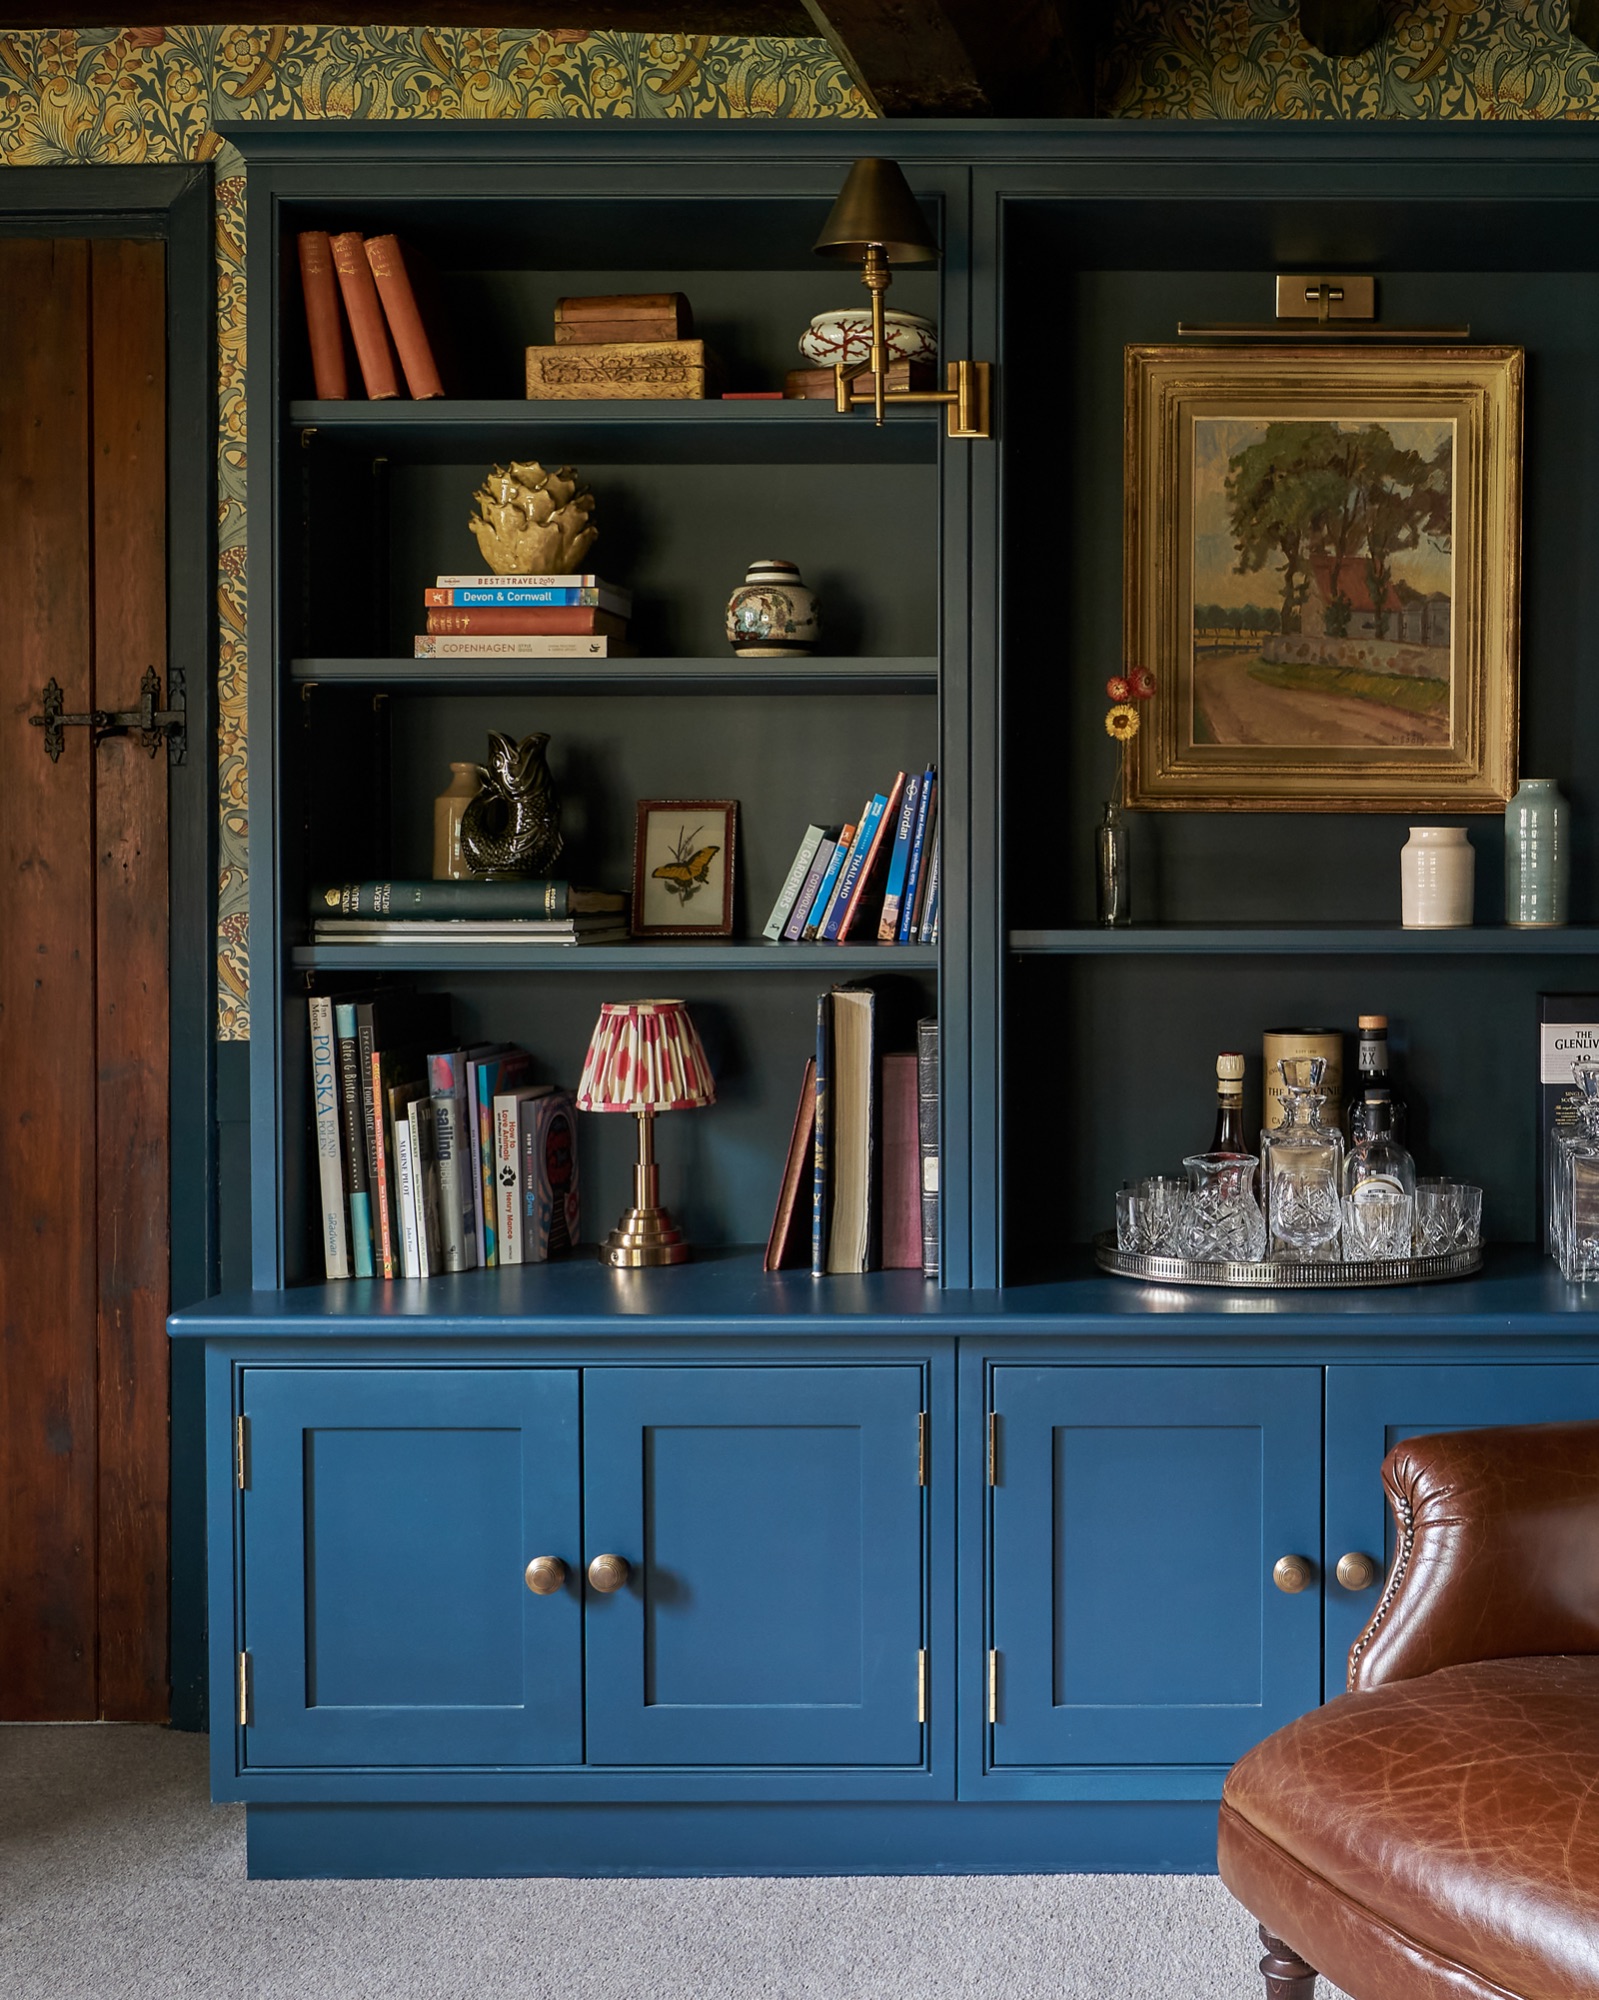 farrow and ball Hague blue  cabinetry with William Morris wallpaper. Pooky lighting and  art ones  vintage artwork